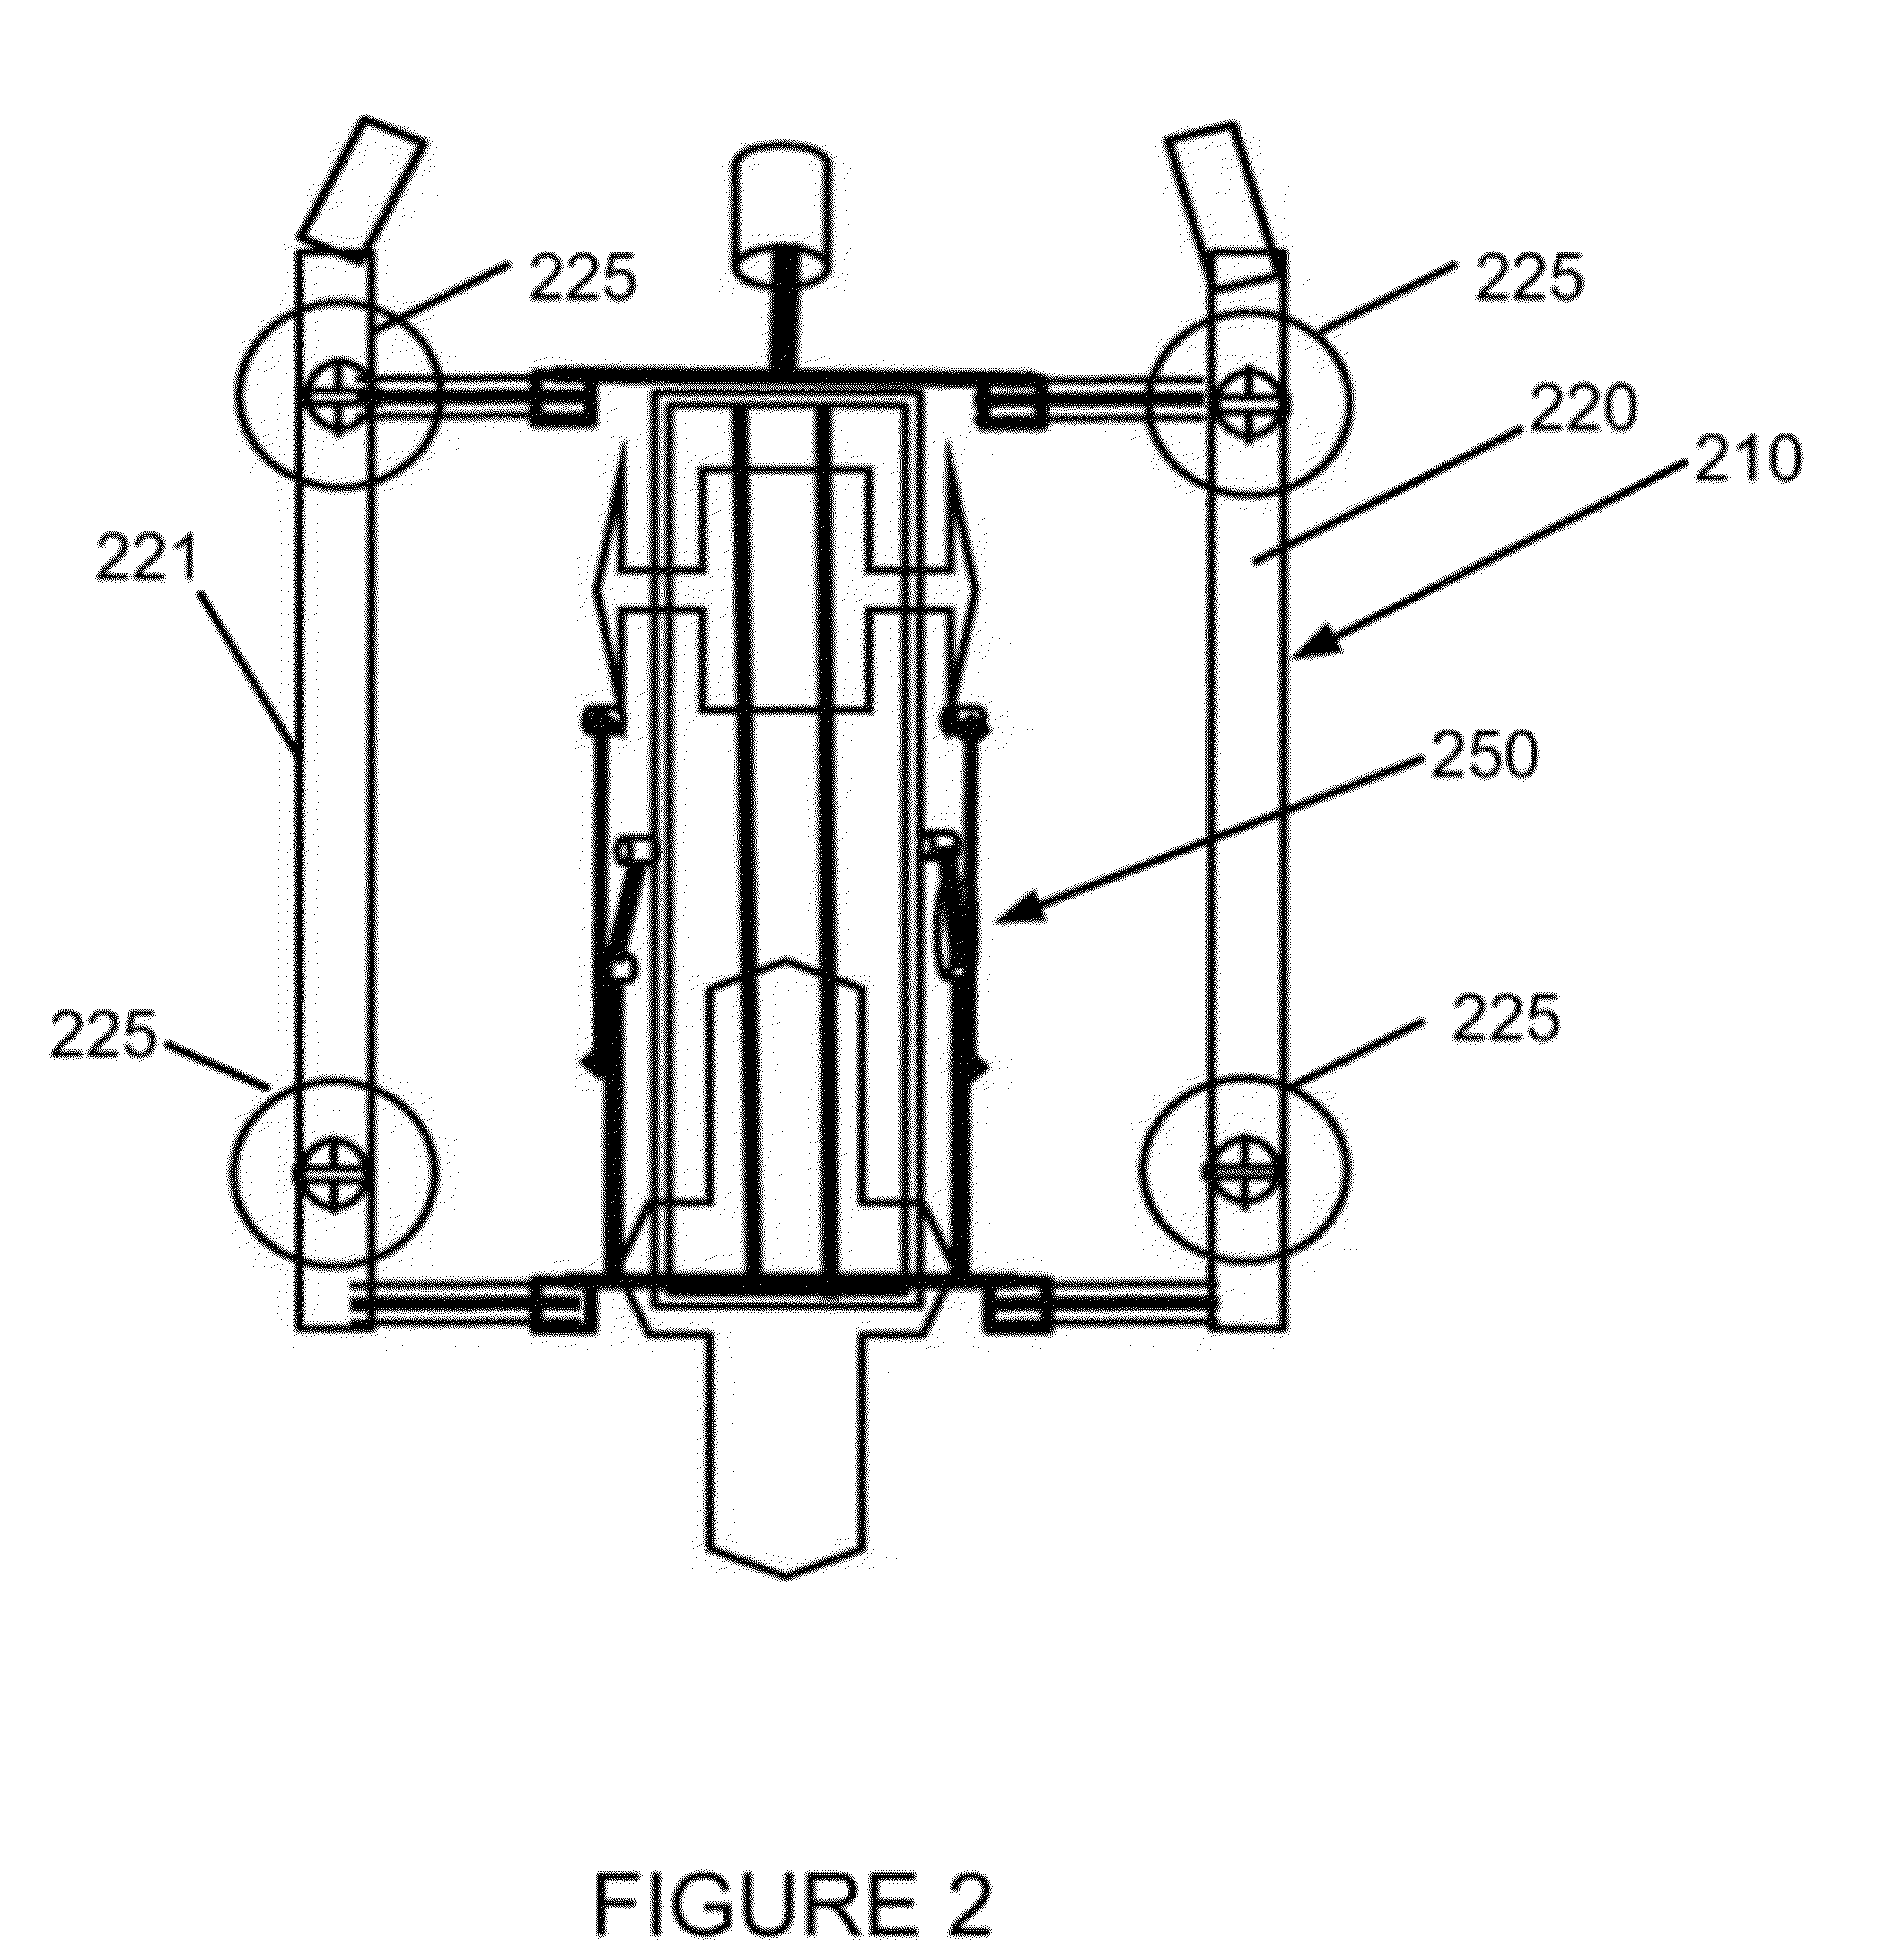 Method and apparatus for application of mortar